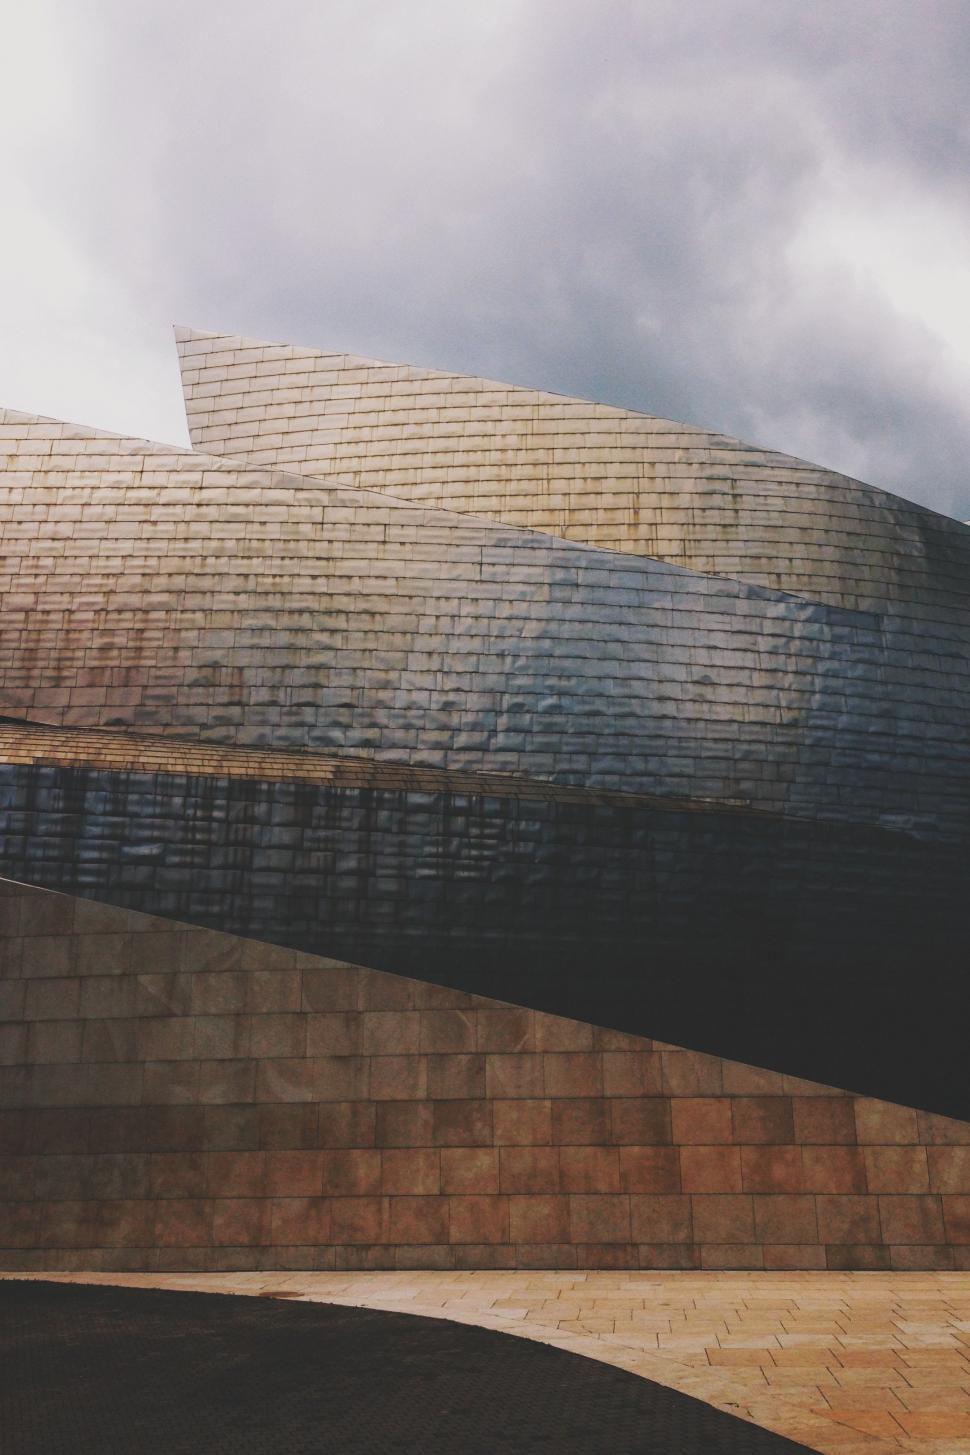 Free Image of Large Building With Curved Roof Under Cloudy Sky 